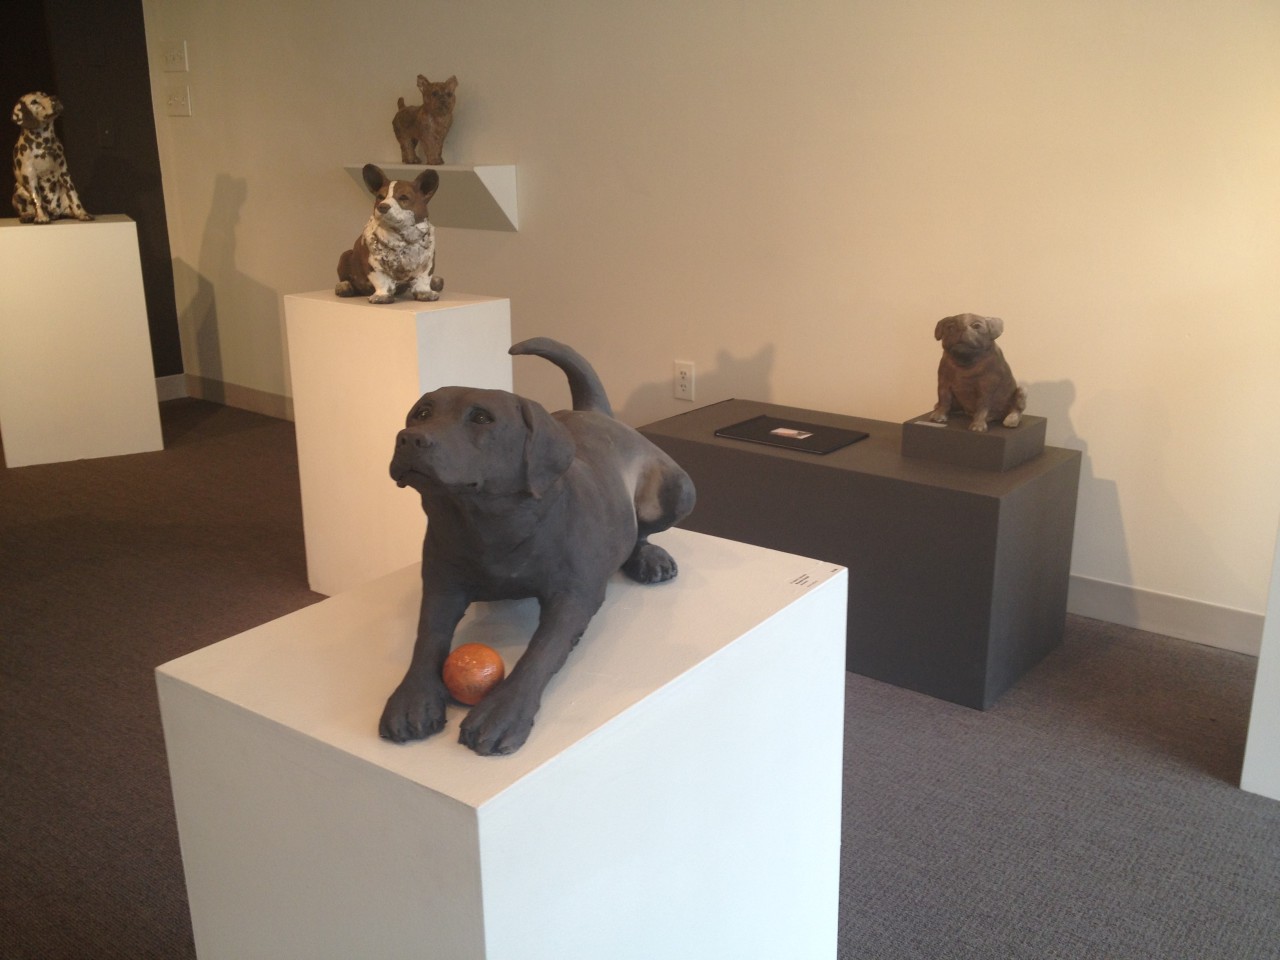 An Exhibit That's Canine Visitors: 'All Dogs' At Concord's Lacoste Gallery | Radio Boston